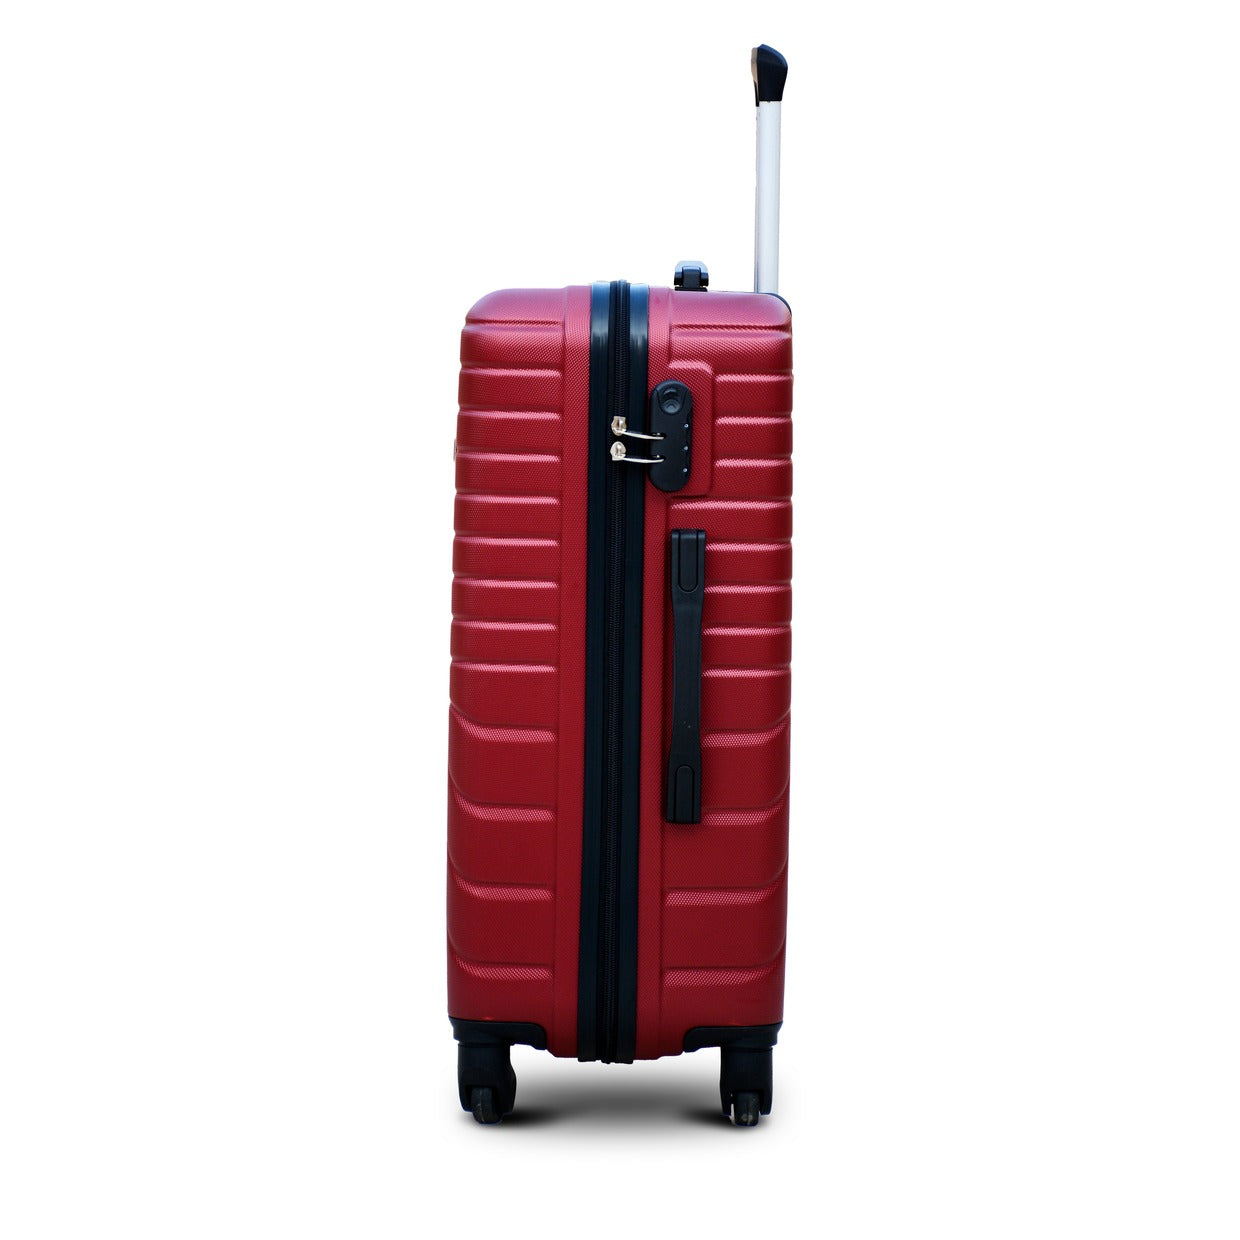 3 Piece Full Set 20" 24" 28 Inches SJ ABS Luggage Red Colour Lightweight Hard Case Trolley Bag | 2 Year Warranty